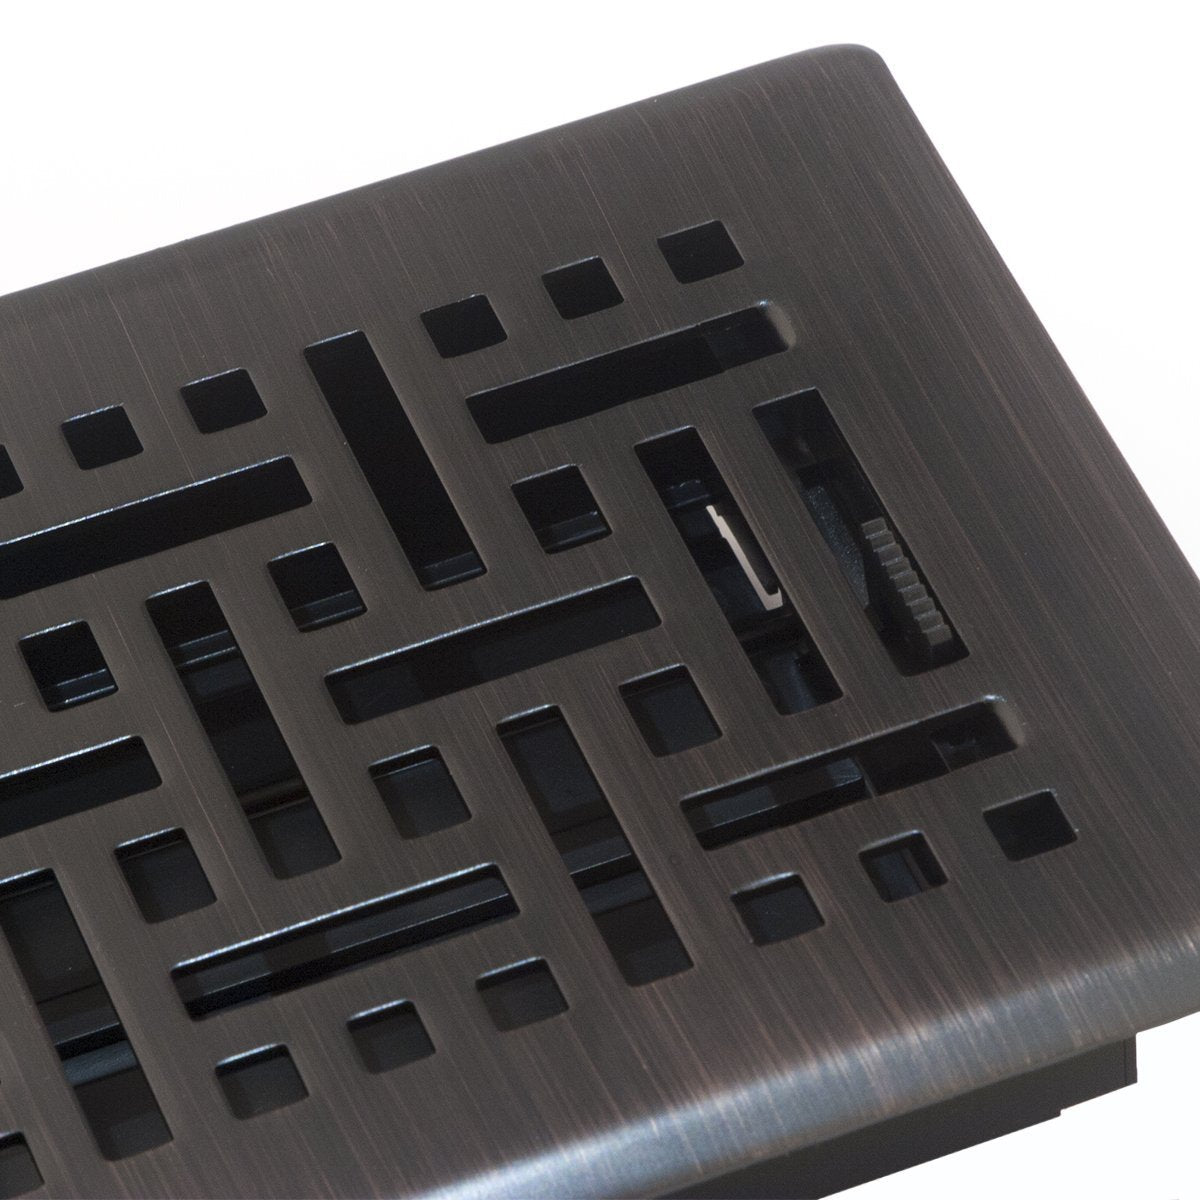 4&quot; X 14&quot; Modern Victorian Floor Register Grille With Dampers - Decorative Grate - HVAC Vent Duct Cover - Matte Black